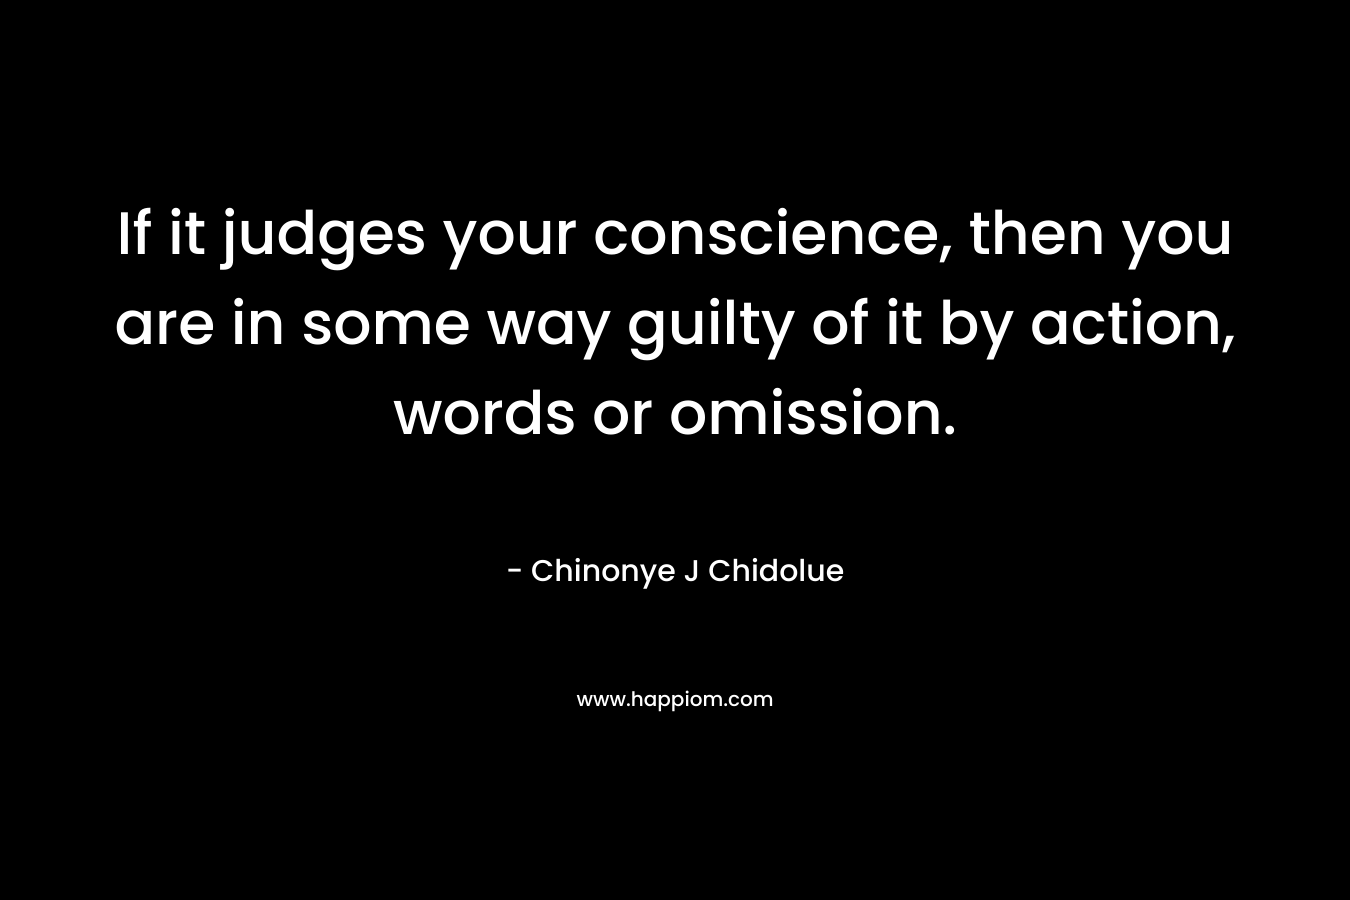 If it judges your conscience, then you are in some way guilty of it by action, words or omission. – Chinonye J Chidolue